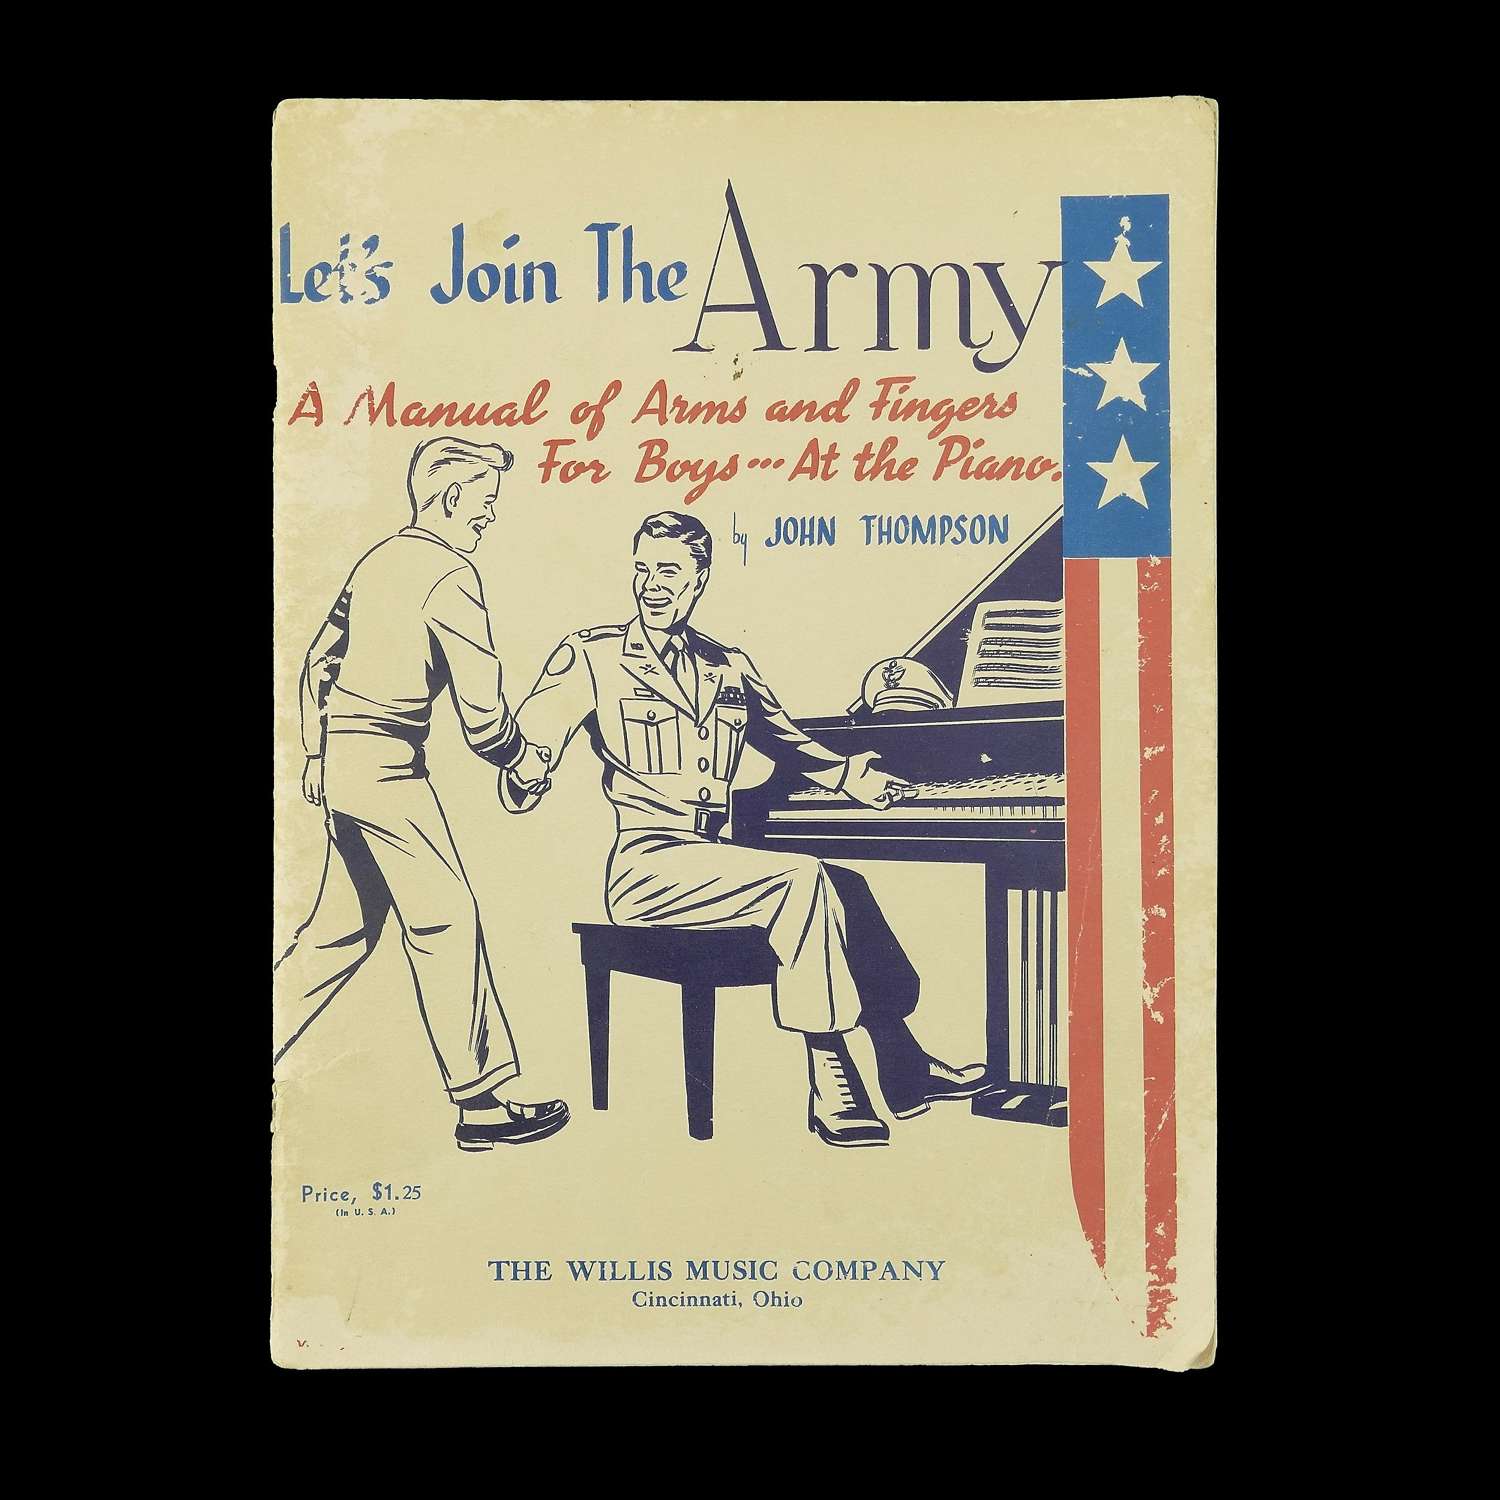 Sheet music - Let's Join The Army